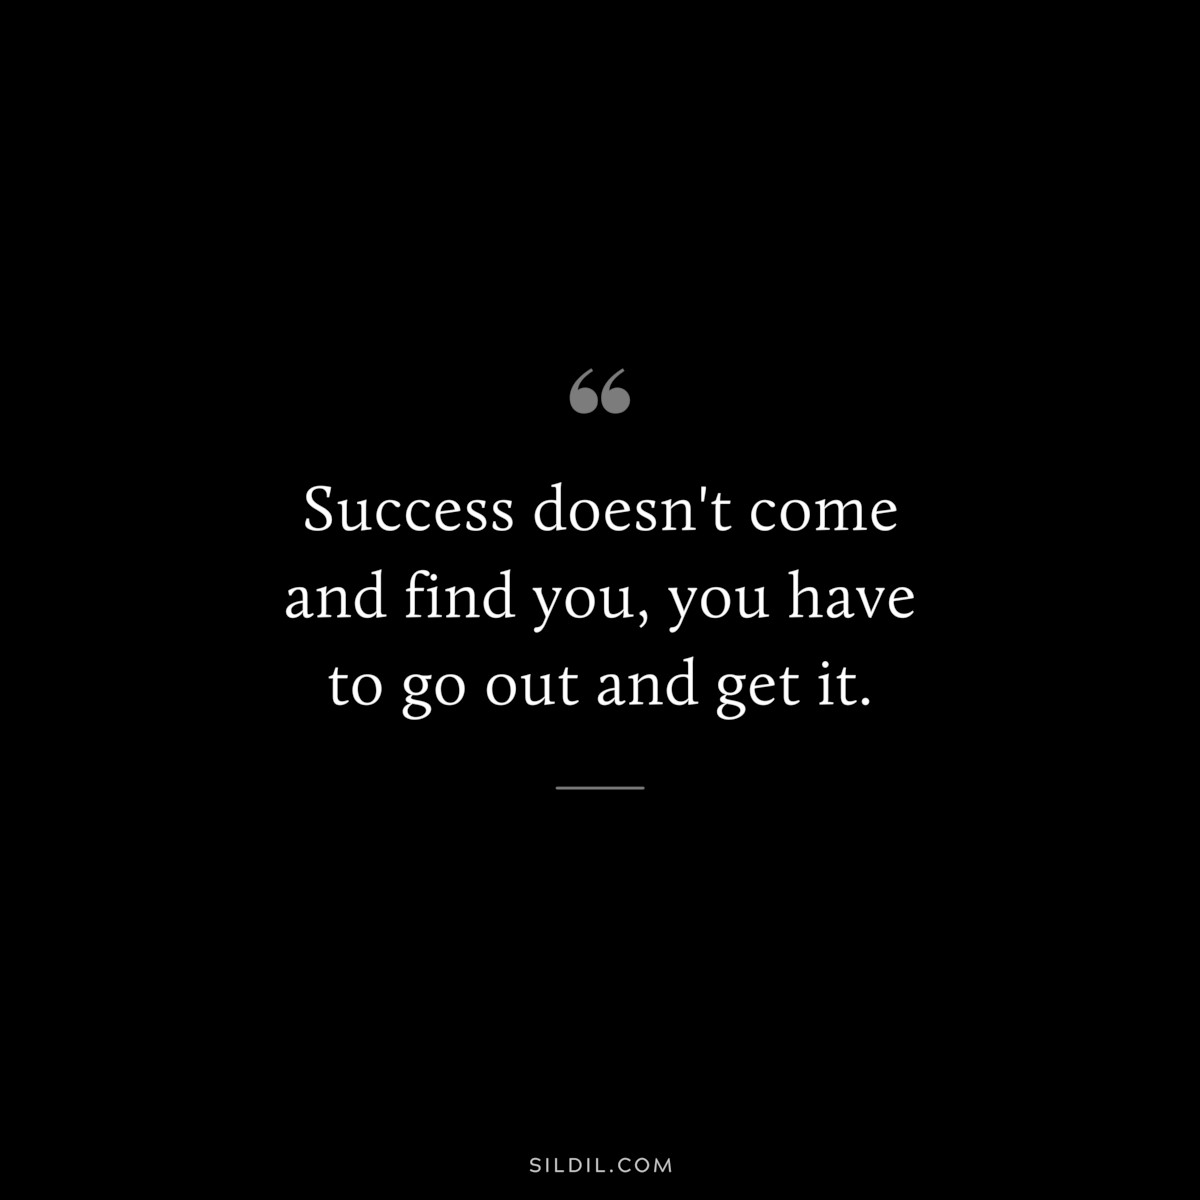 Success doesn't come and find you, you have to go out and get it.